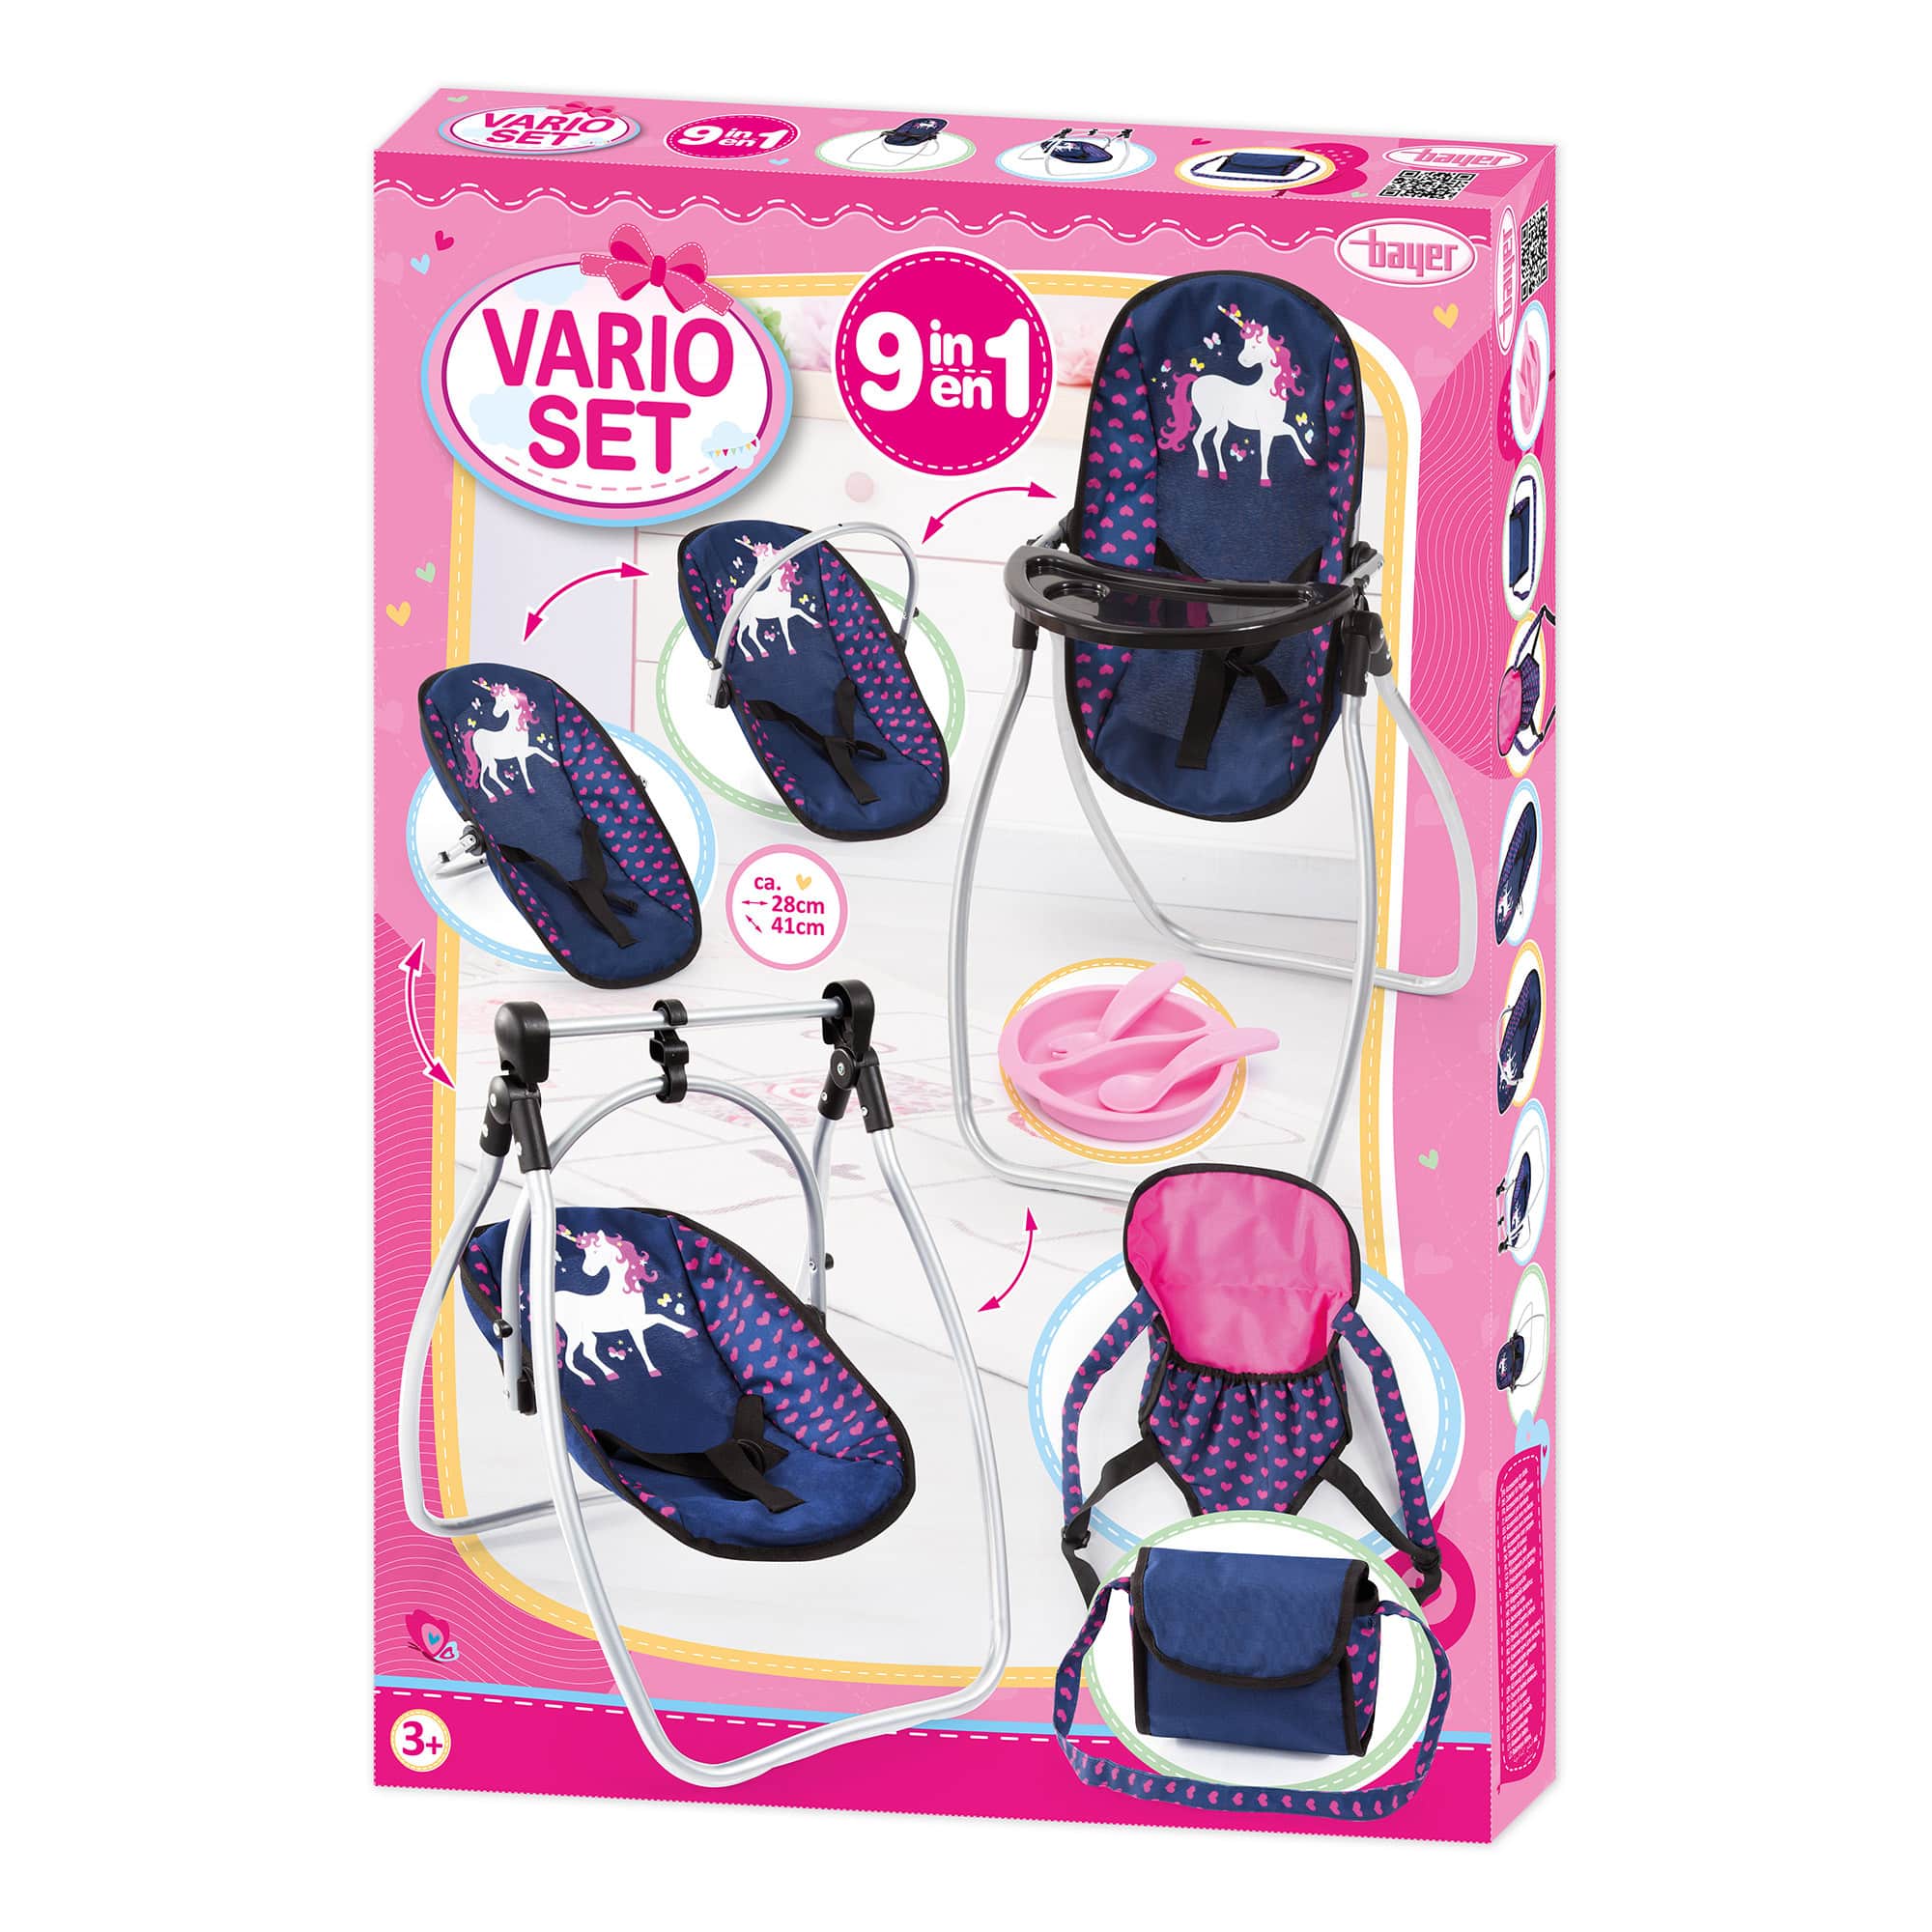 Bayer Vario 9-in-1 Doll Accessories Set - Blue with Pink Hearts